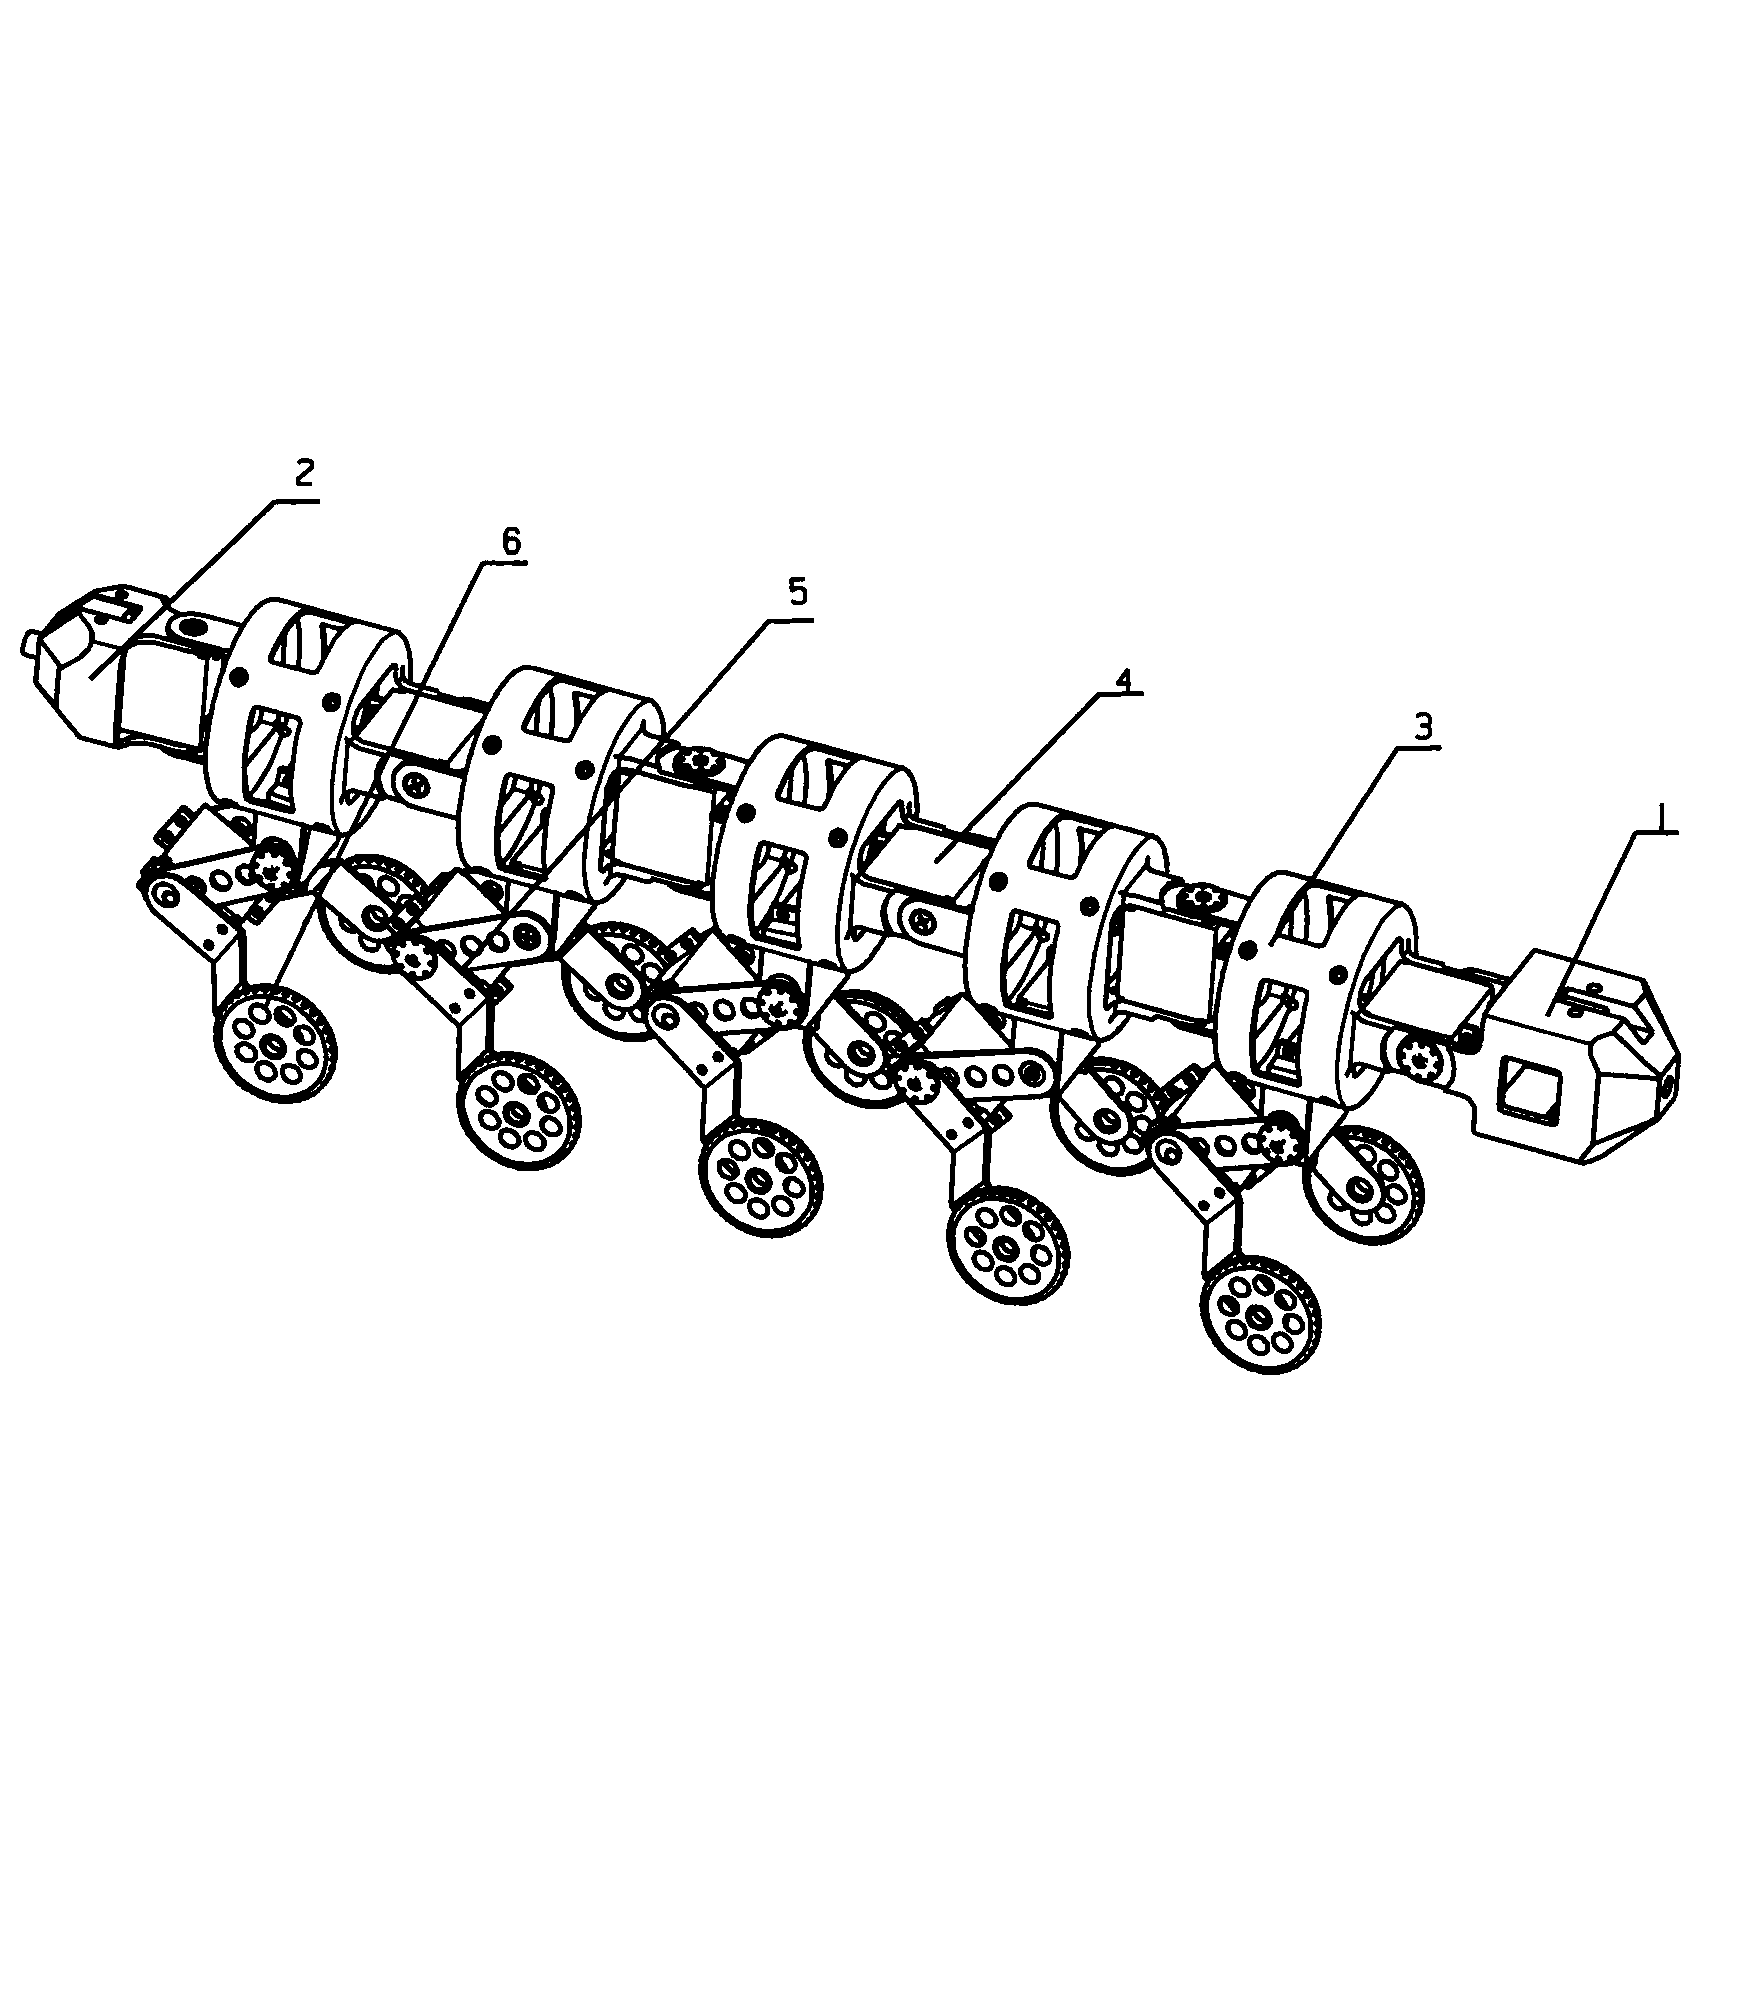 Transformable search-and-rescue robot with multiple motion tread